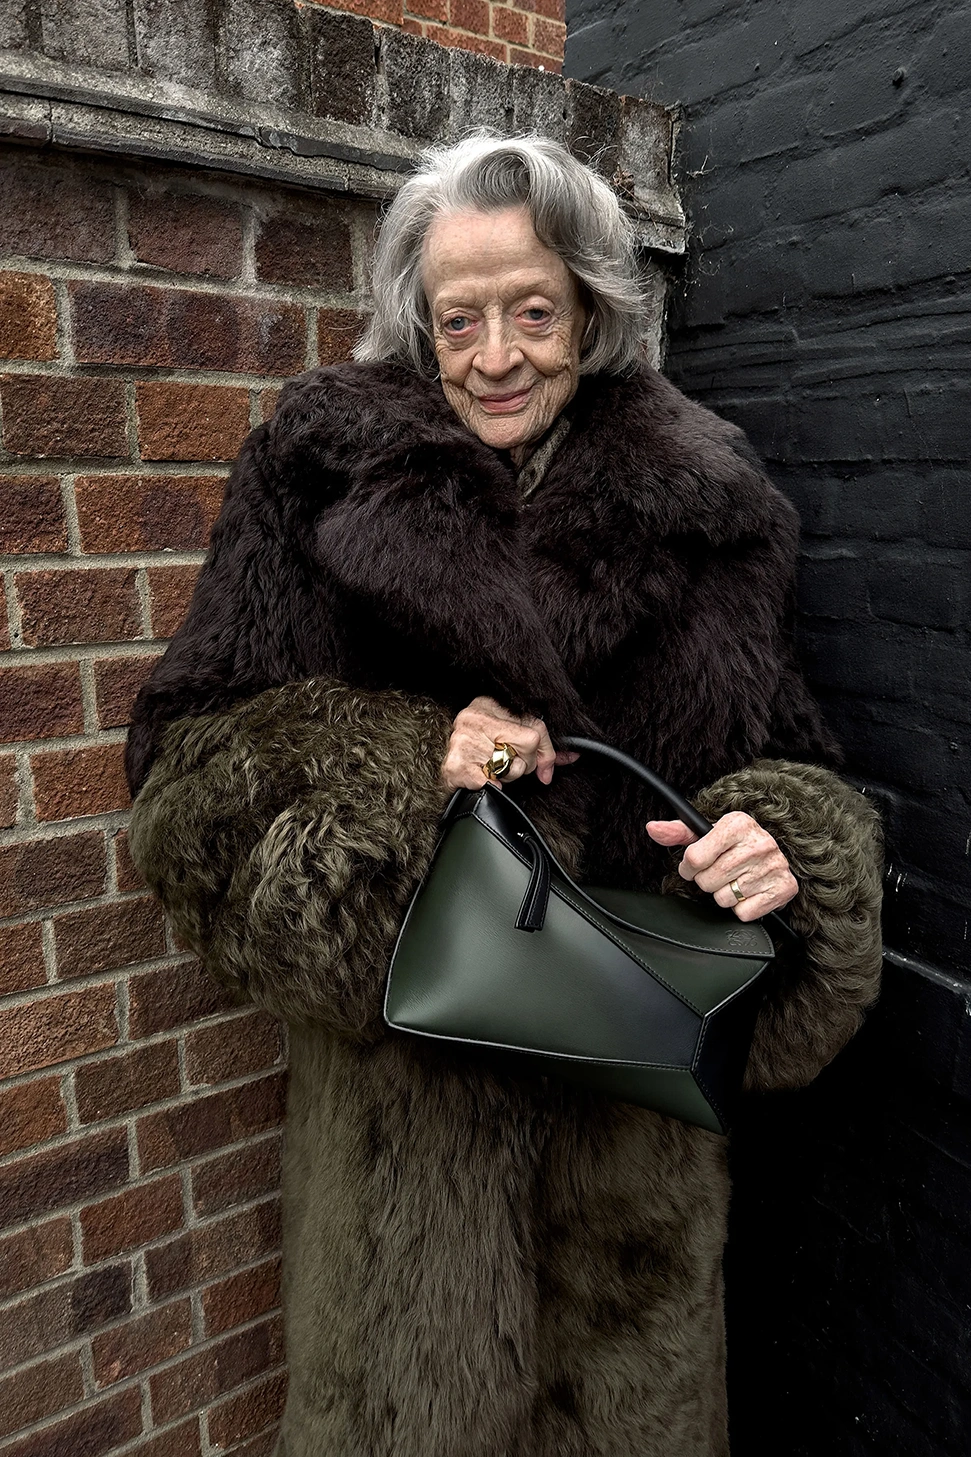 Maggie Smith Stars In The Loewe Ss24 New Fashion Campaign